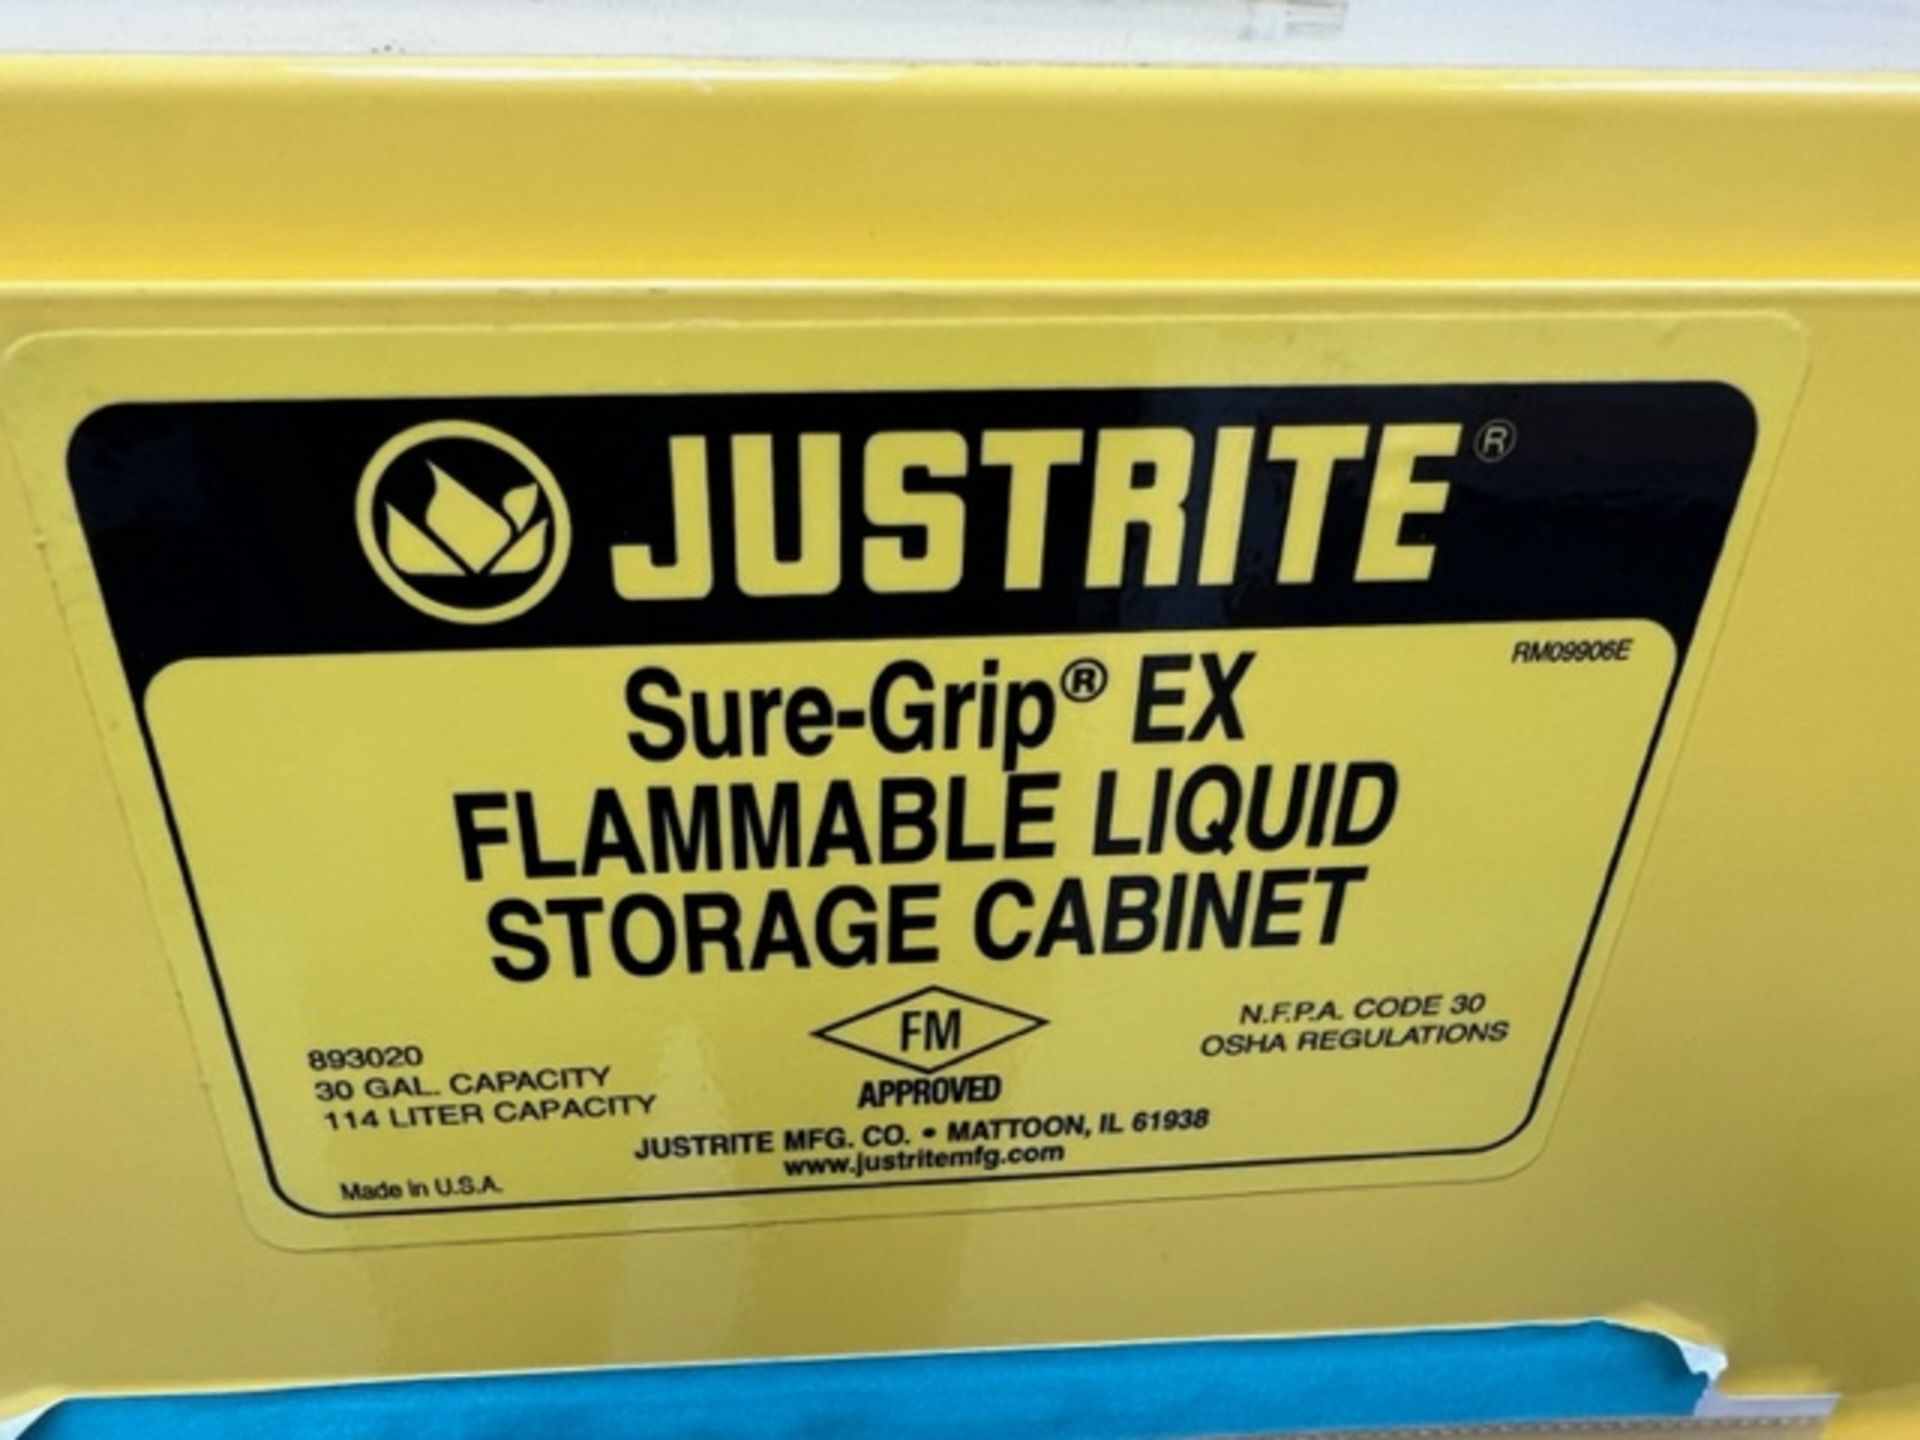 Asset 261- Justrite flammable liquid storage cabinet, 39" wide x 17" deep x 43" tall. $345.00 Rigged - Image 4 of 4